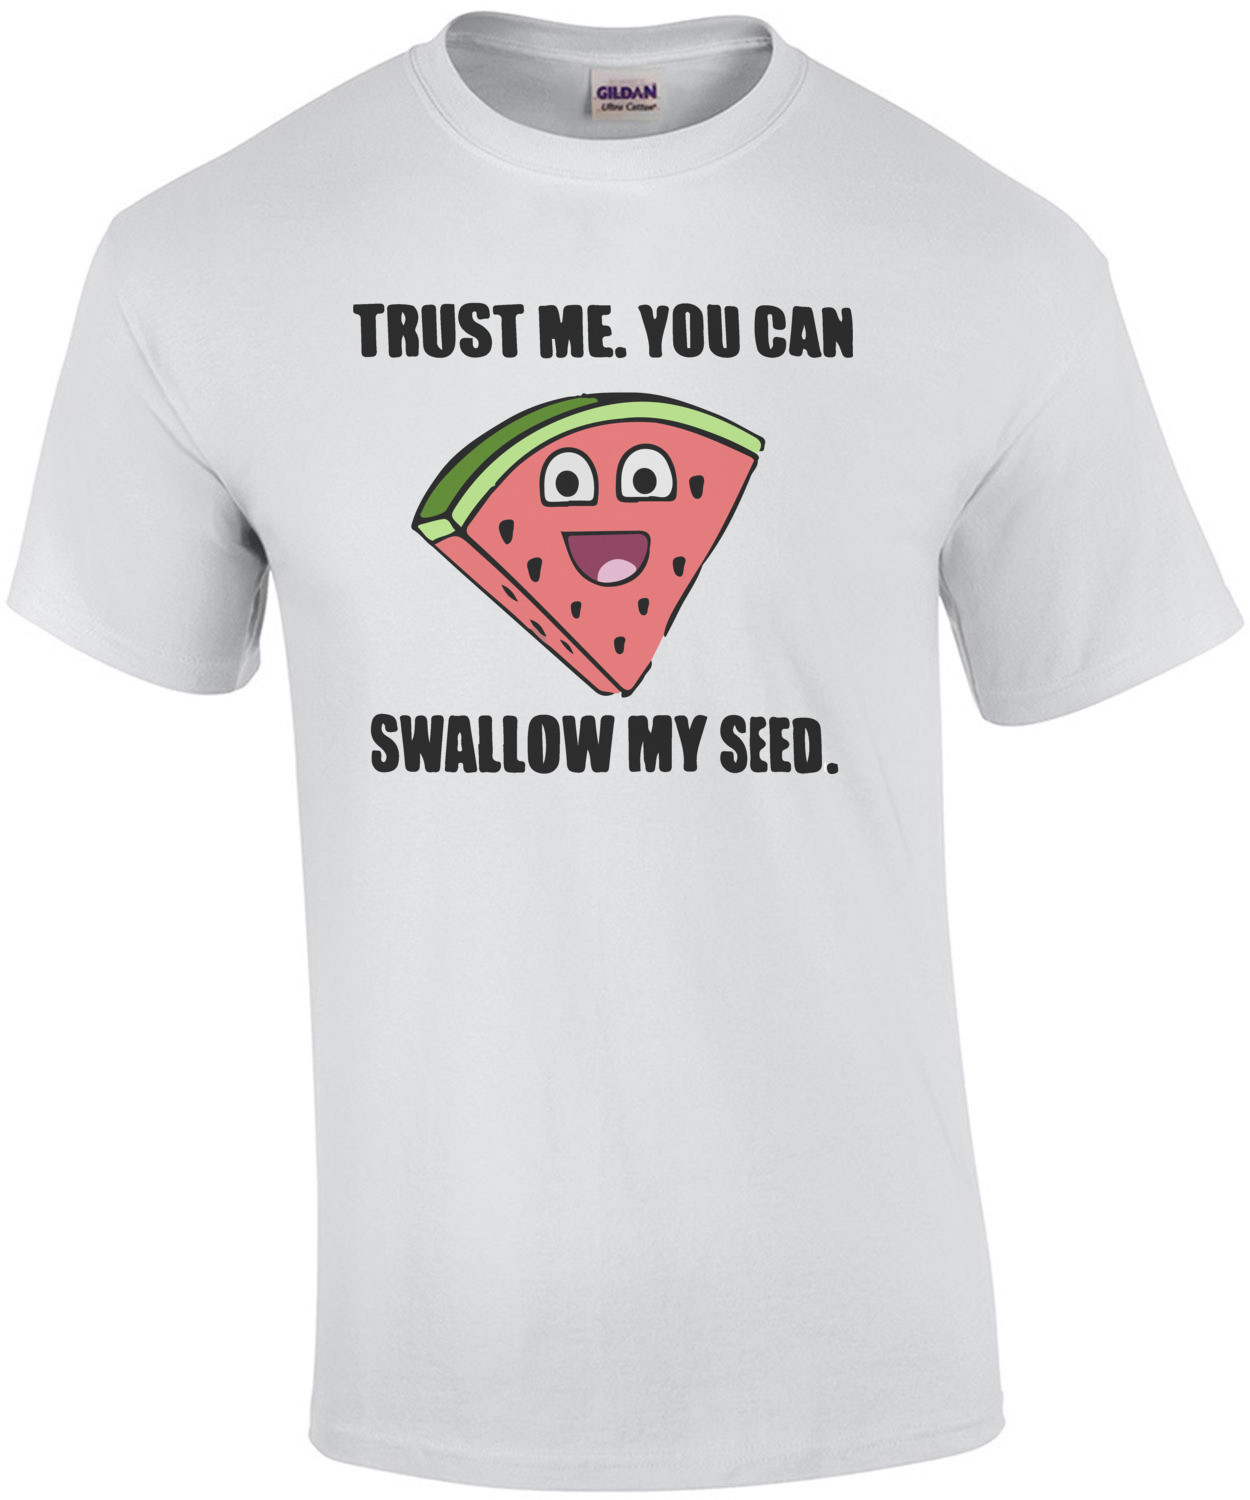 Trust me. You can swallow my seed. Funny Offensive - Sexual 